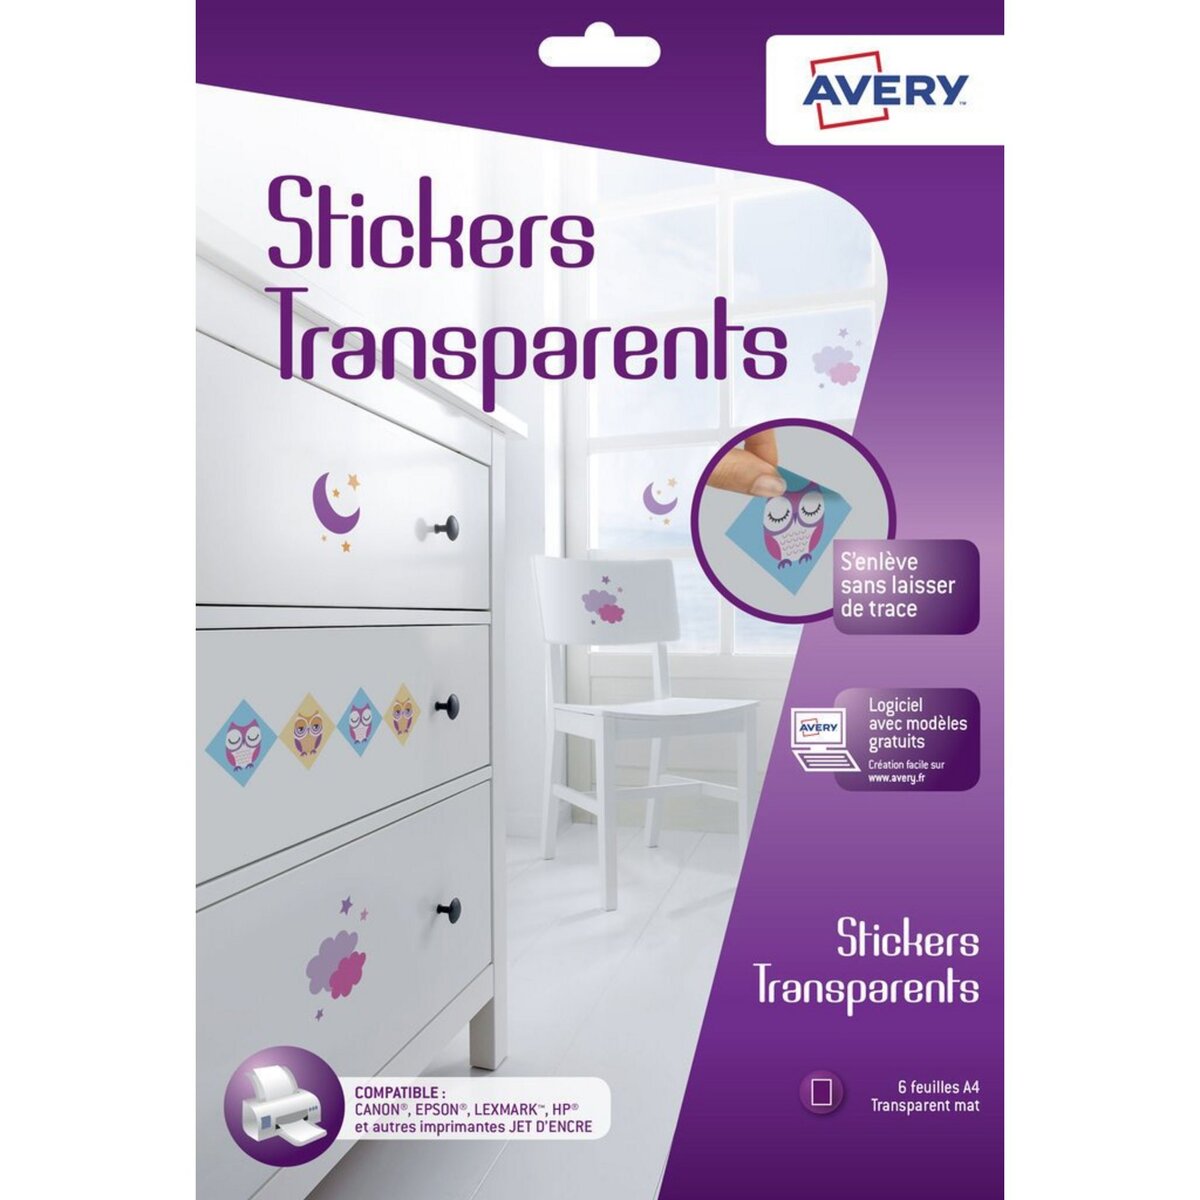 AVERY Avery Stickers Transparents A4 - C9421